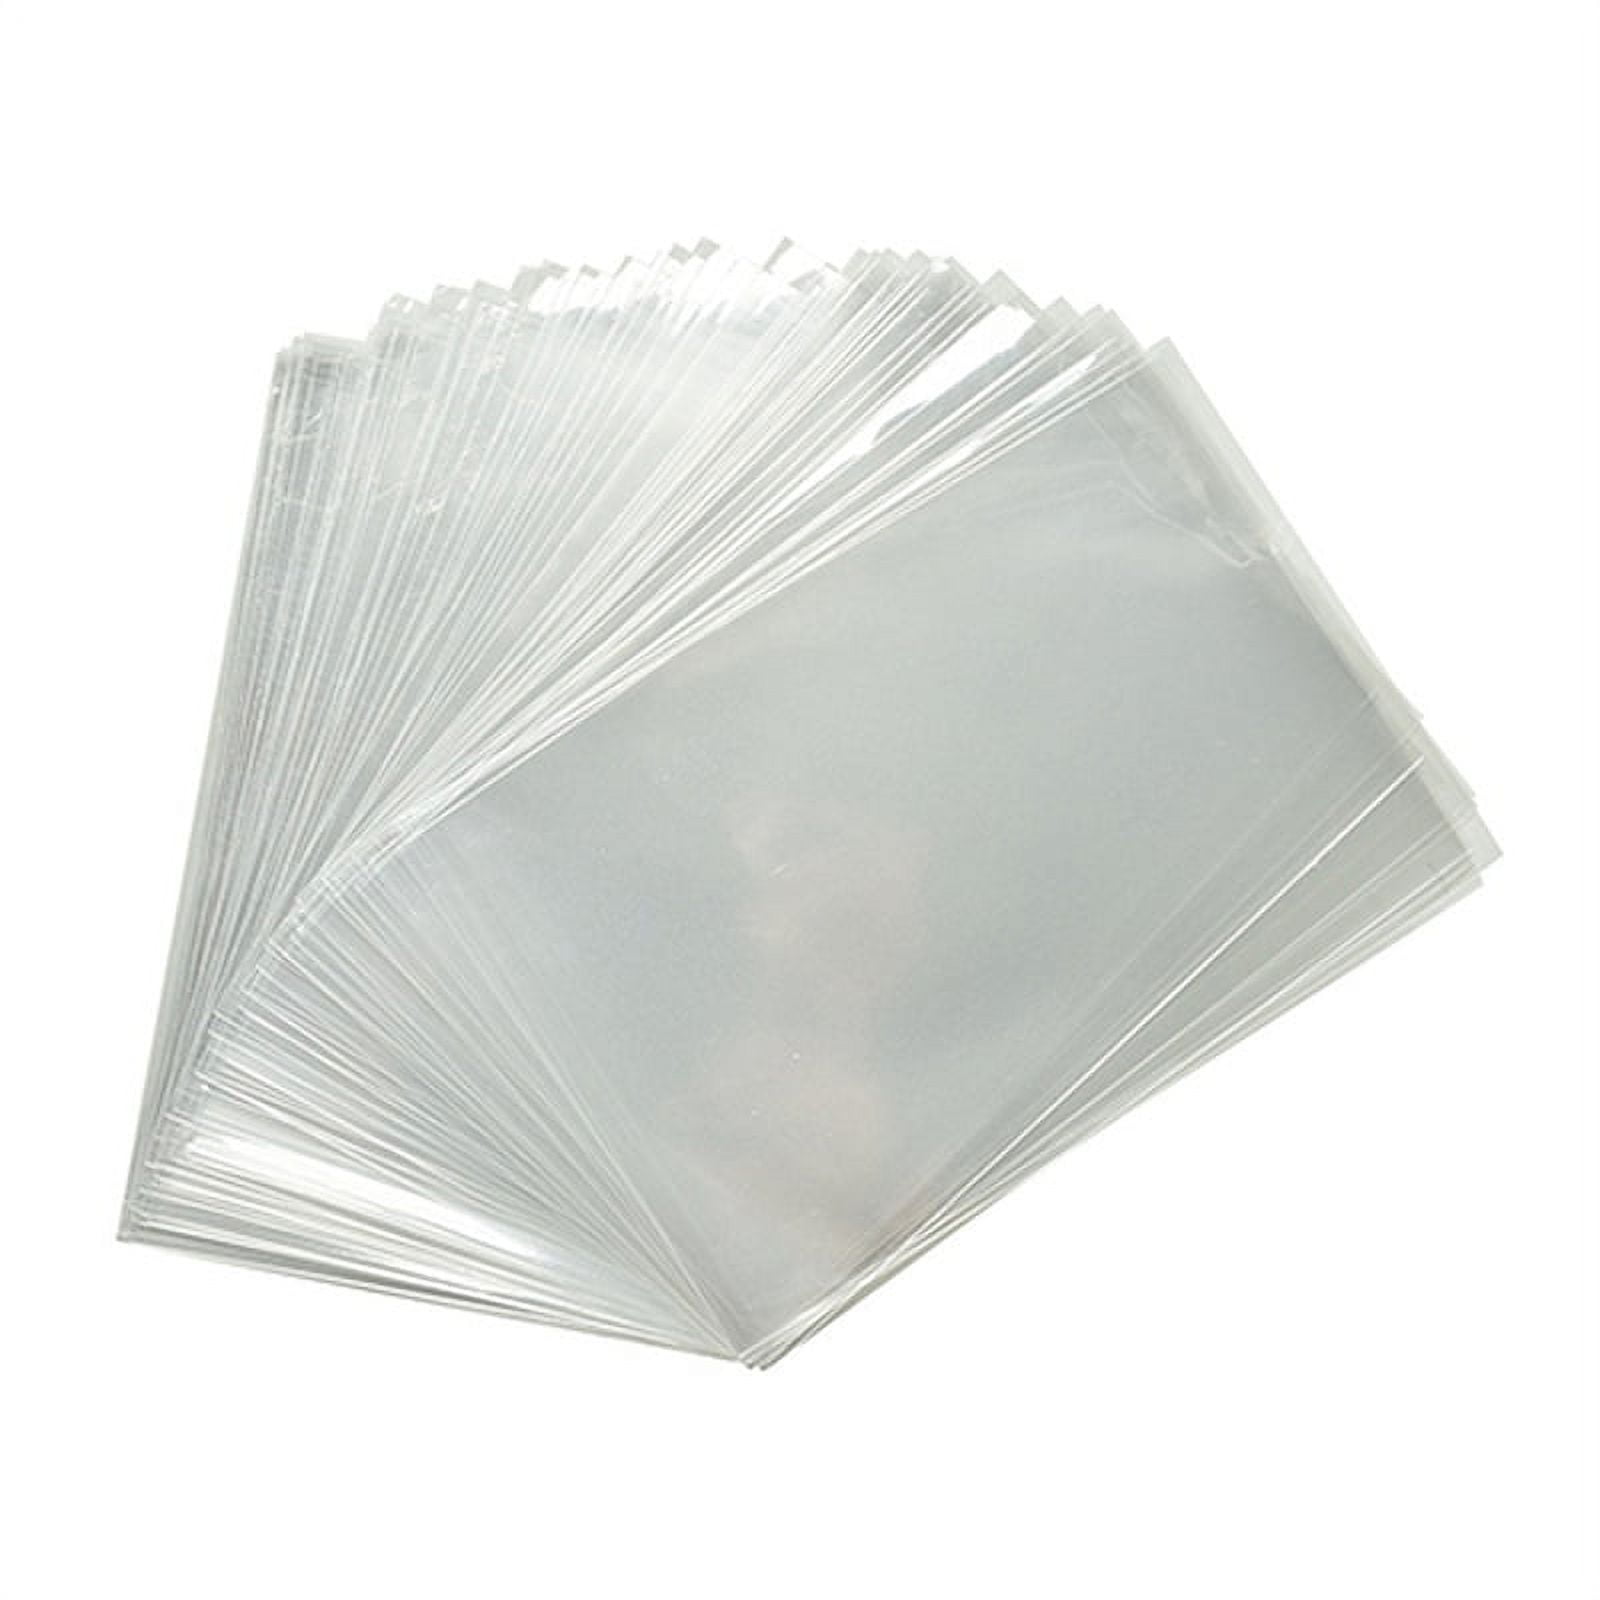 100 PC Bulk Medium Clear Cellophane Bags with Gold Bow Kit